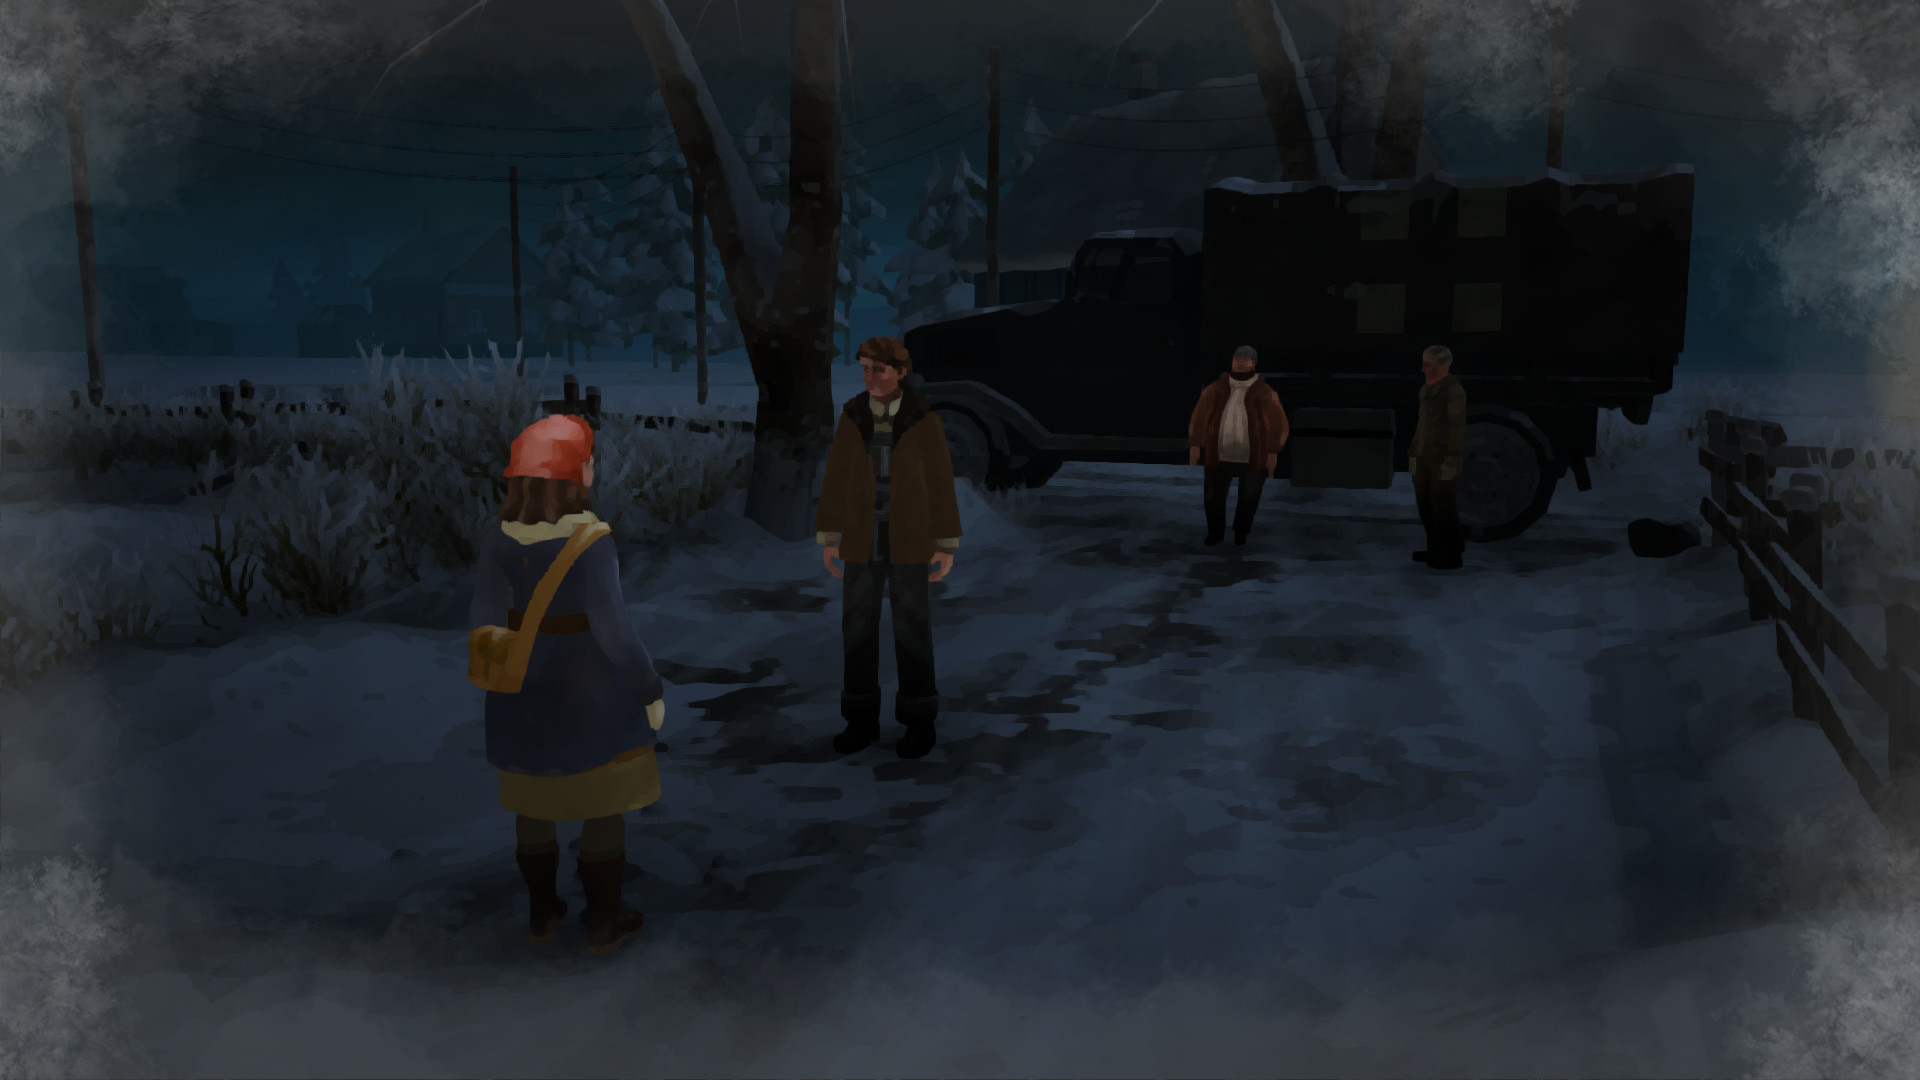 Don't Nod Gerda screenshot showing the main character and 3 others standing in front of a truck